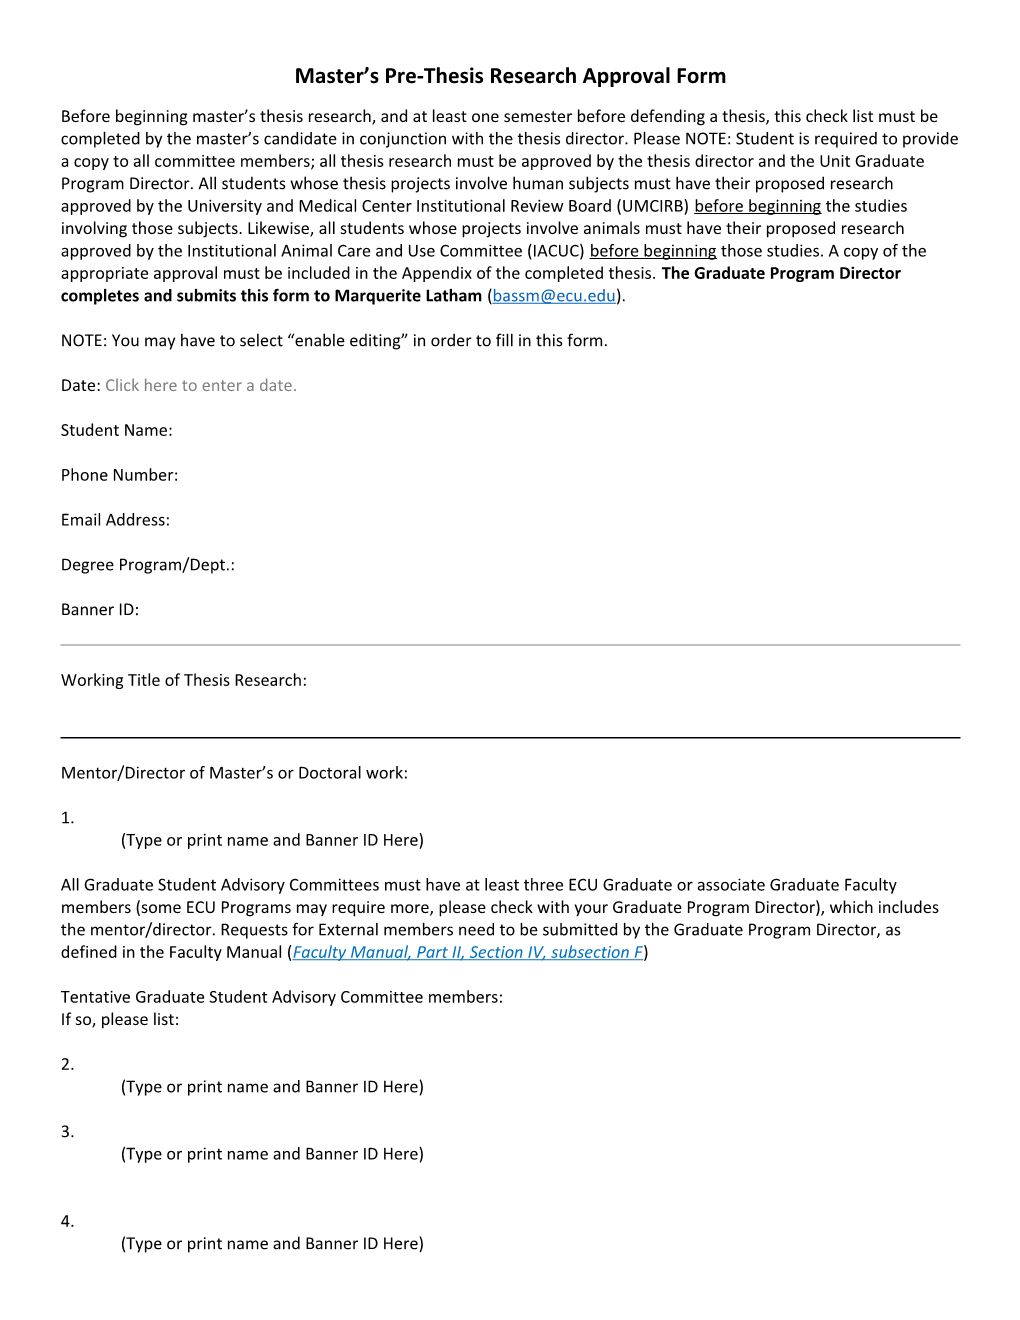 Master S Pre-Thesis Research Approval Form